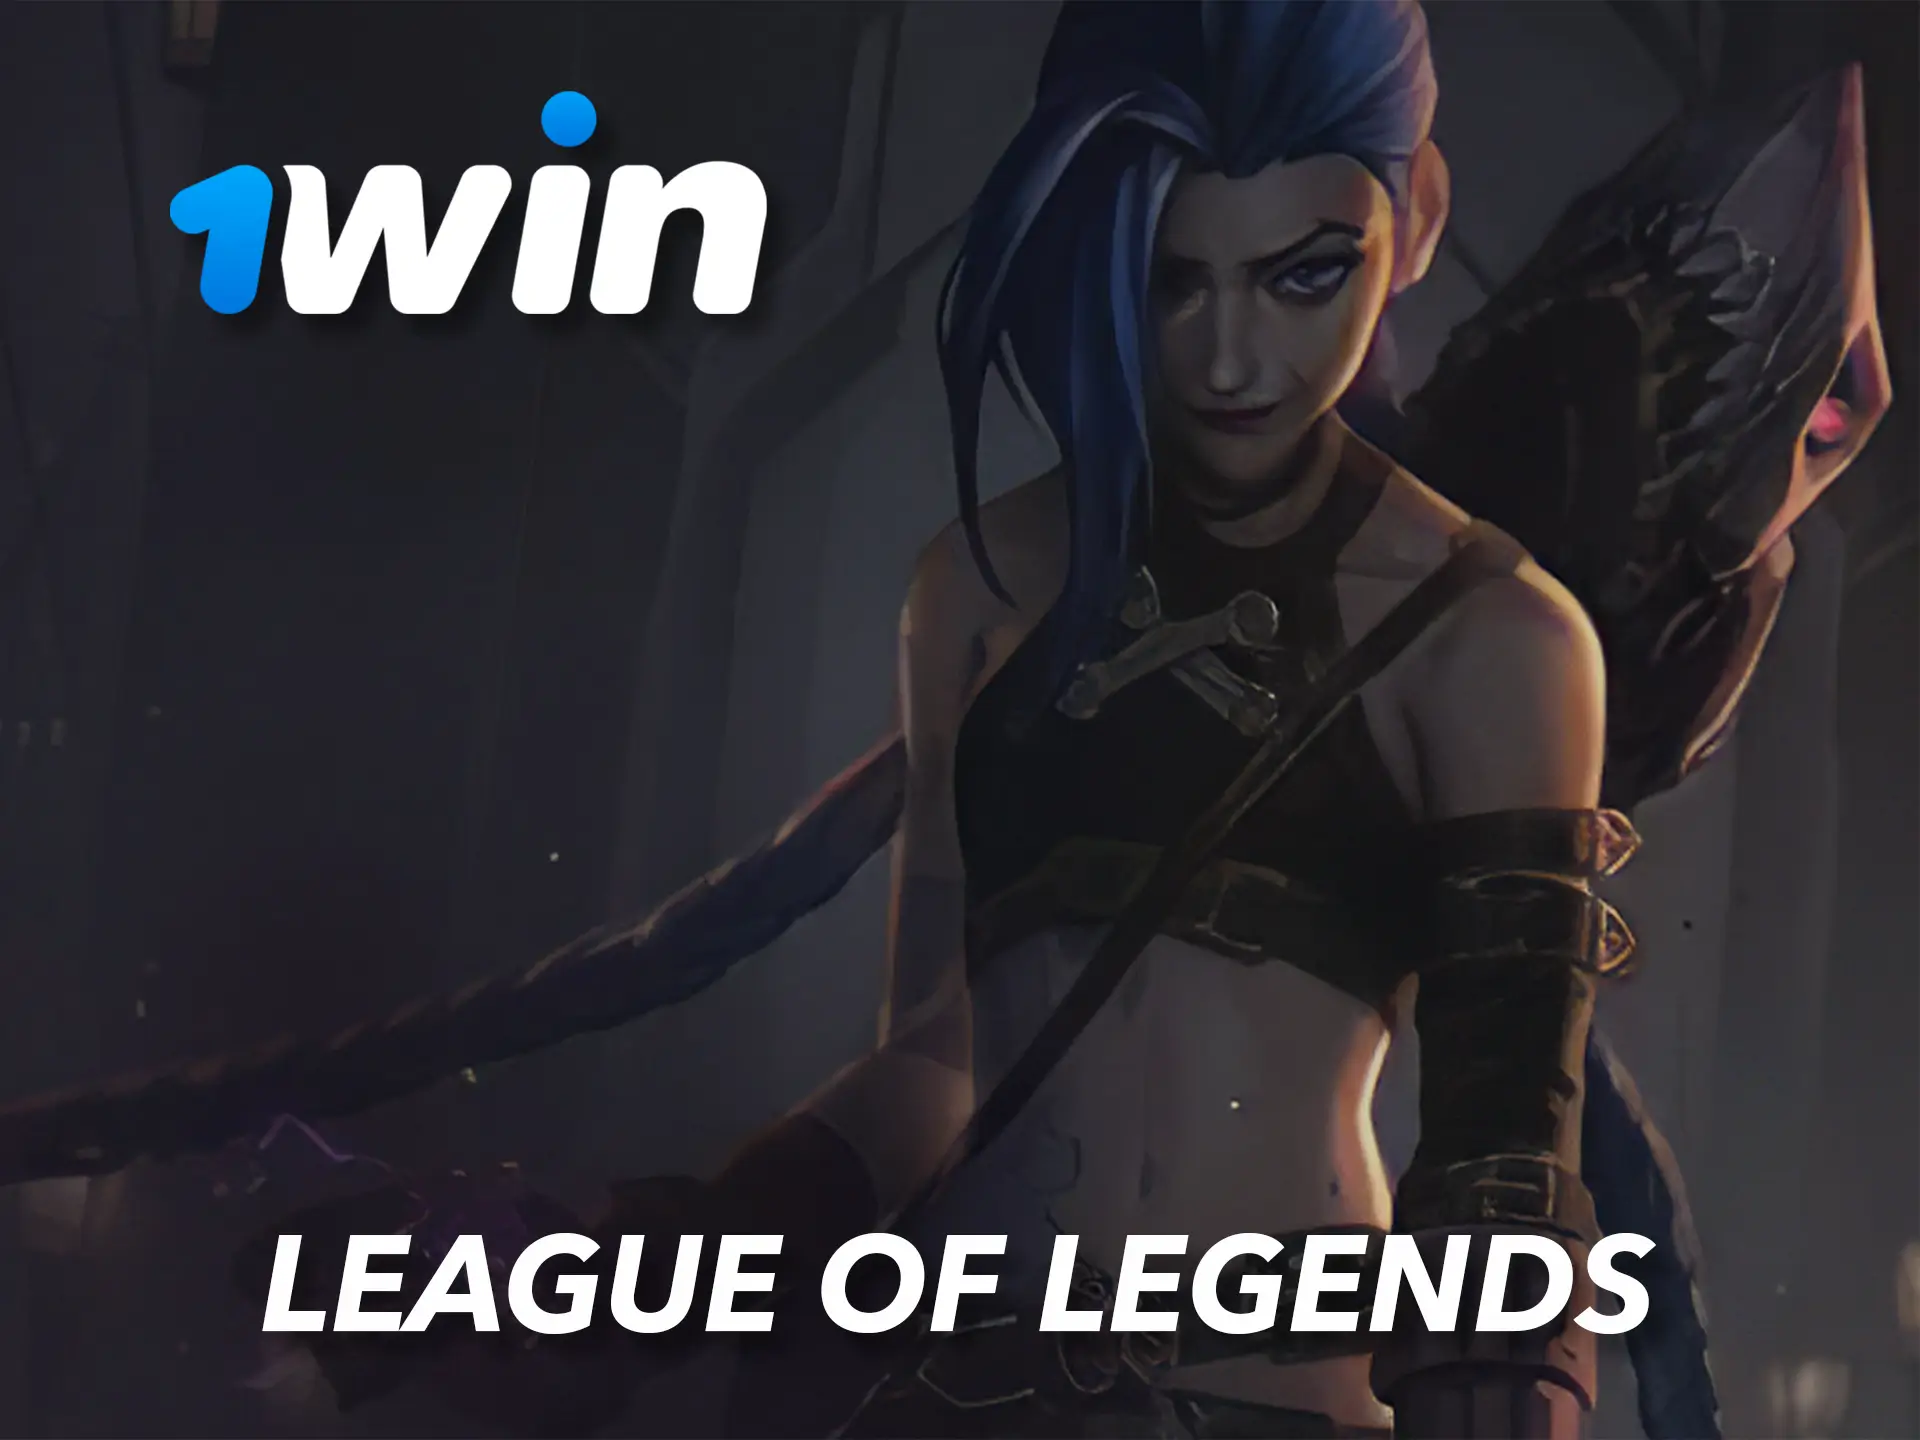 At 1Win you can watch professional teams play league of legends games.